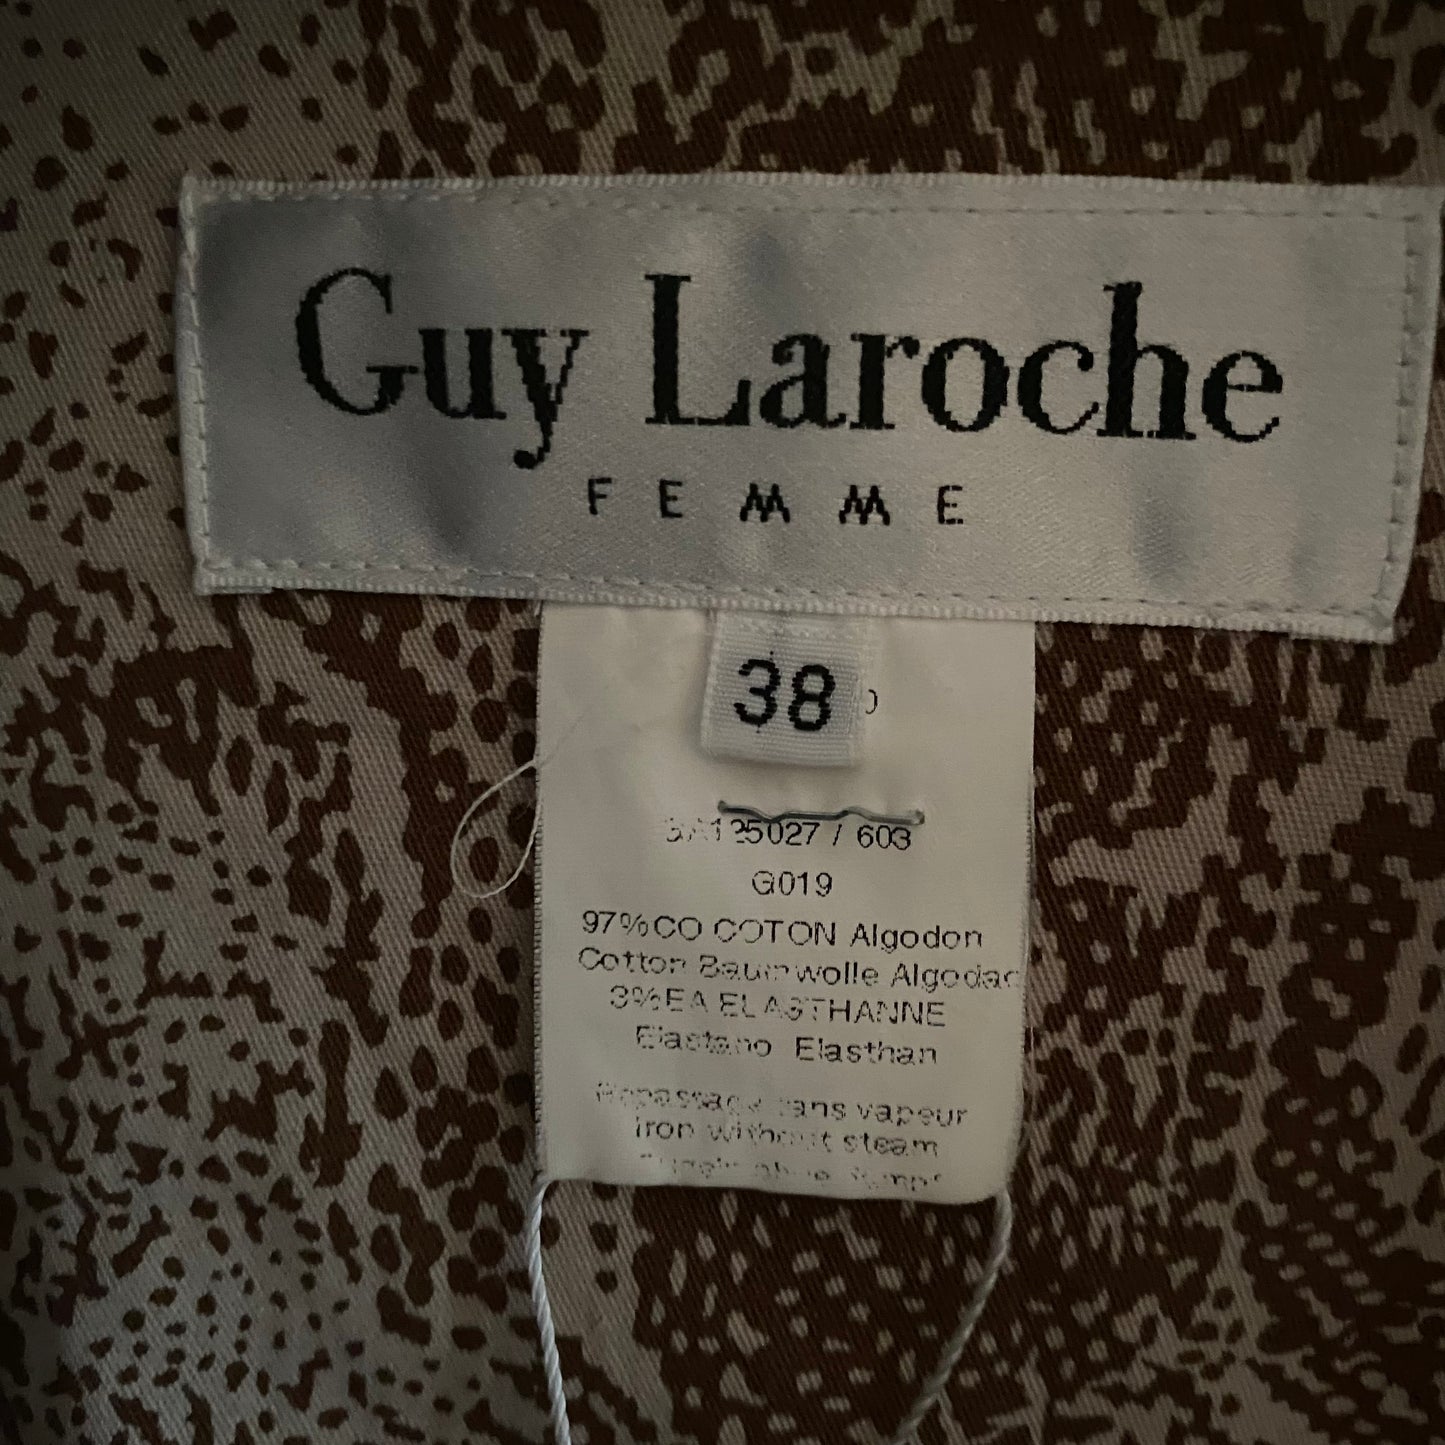 GUY LAROCHE Jackets vintage Lysis Paris pre-owned secondhand